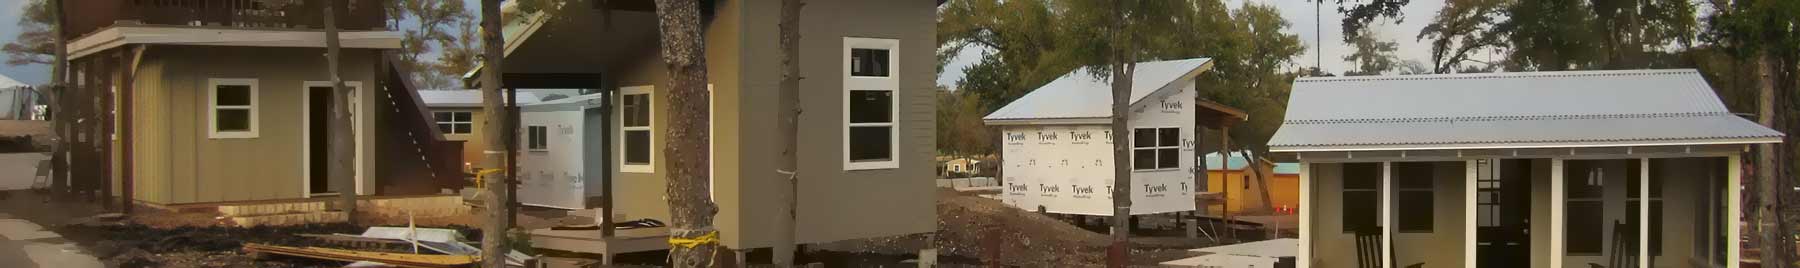 Innovative “tiny houses" under contruction at Community First! Village